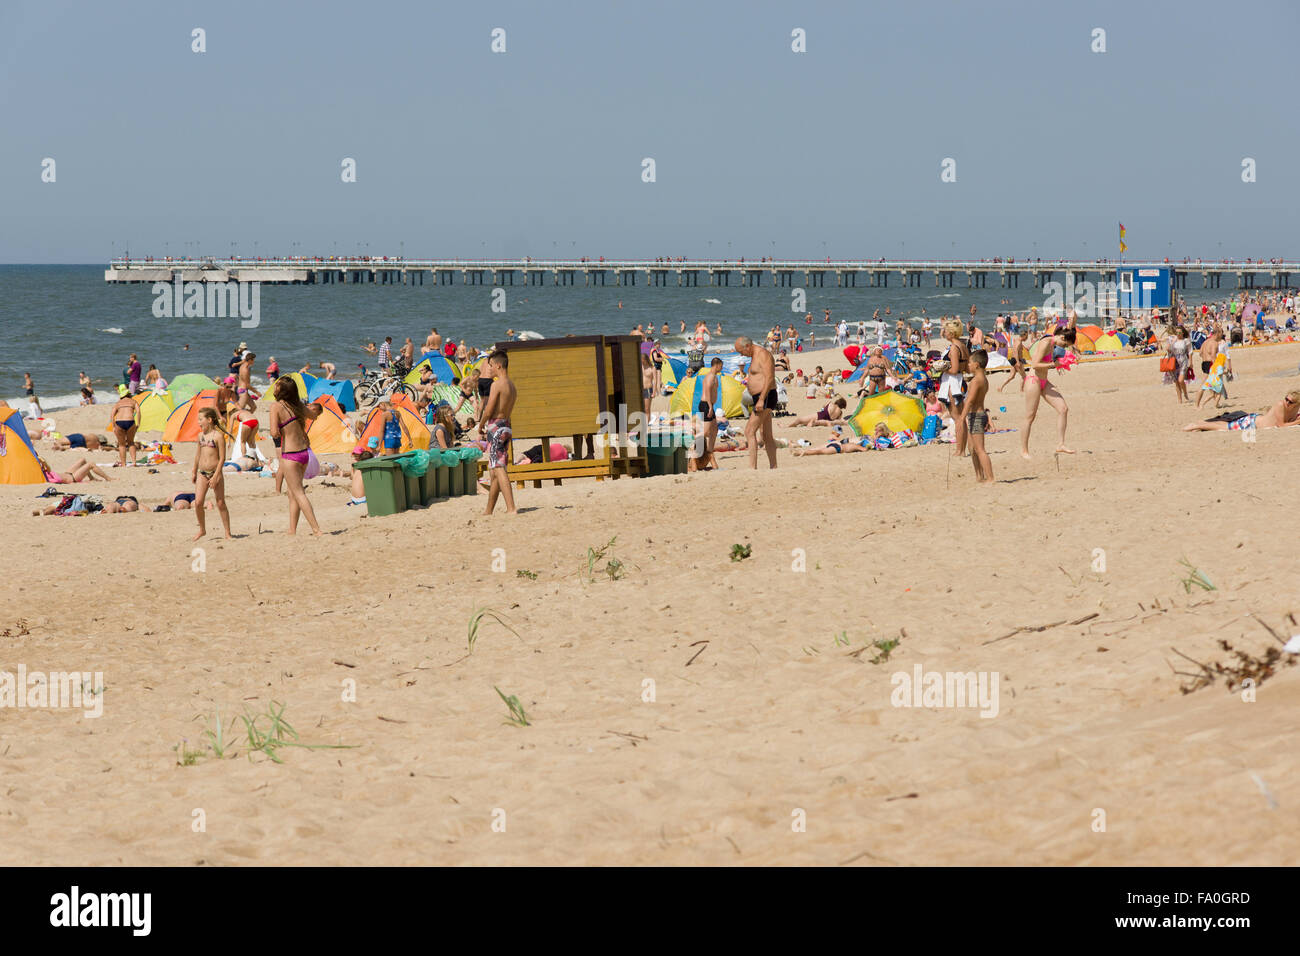 Affluence of holidaymakers to Palanga beach on August 02, 2015 in Palanga, Lithuania. Stock Photo